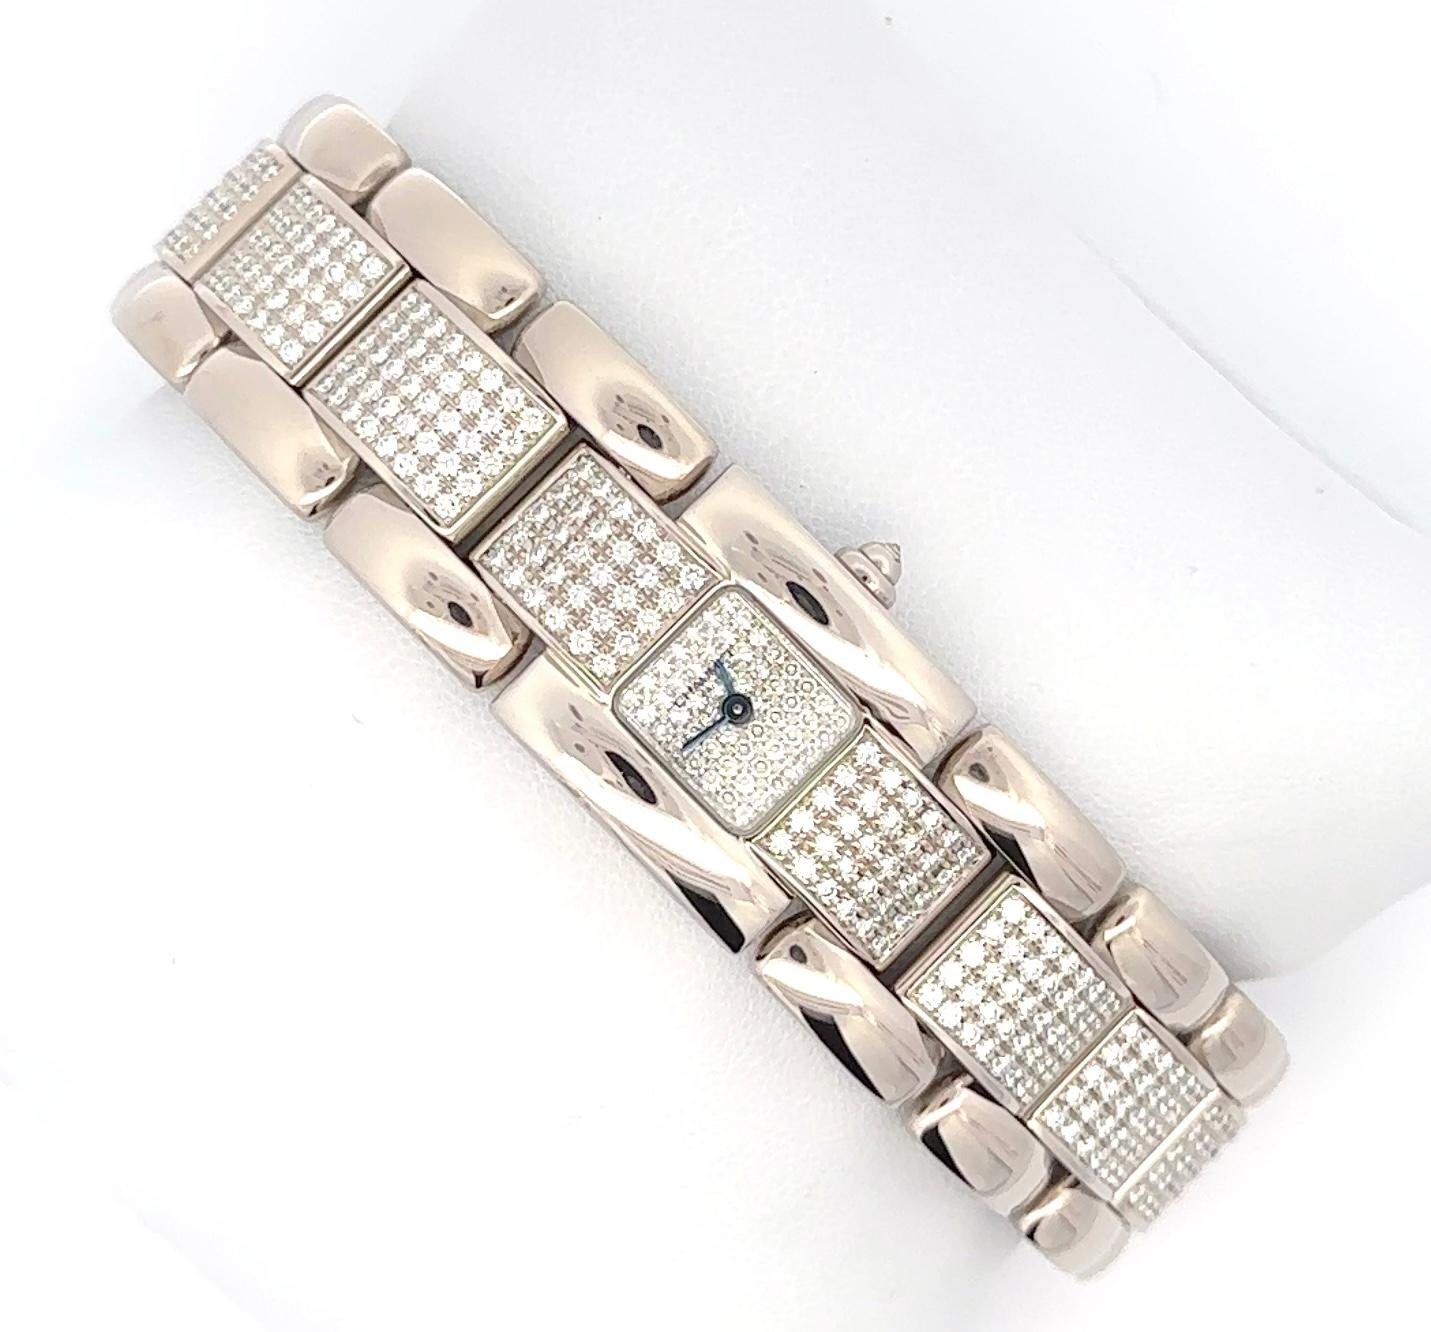 This is a gorgeous, rare and nearly irreplaceable all original Chaumet Diamond watch. The diamond quality is excellent, consisting of 9 carats of colorless, VS+ diamonds. The diamonds are pavé set. The surrounding metal is 18K White Gold with a